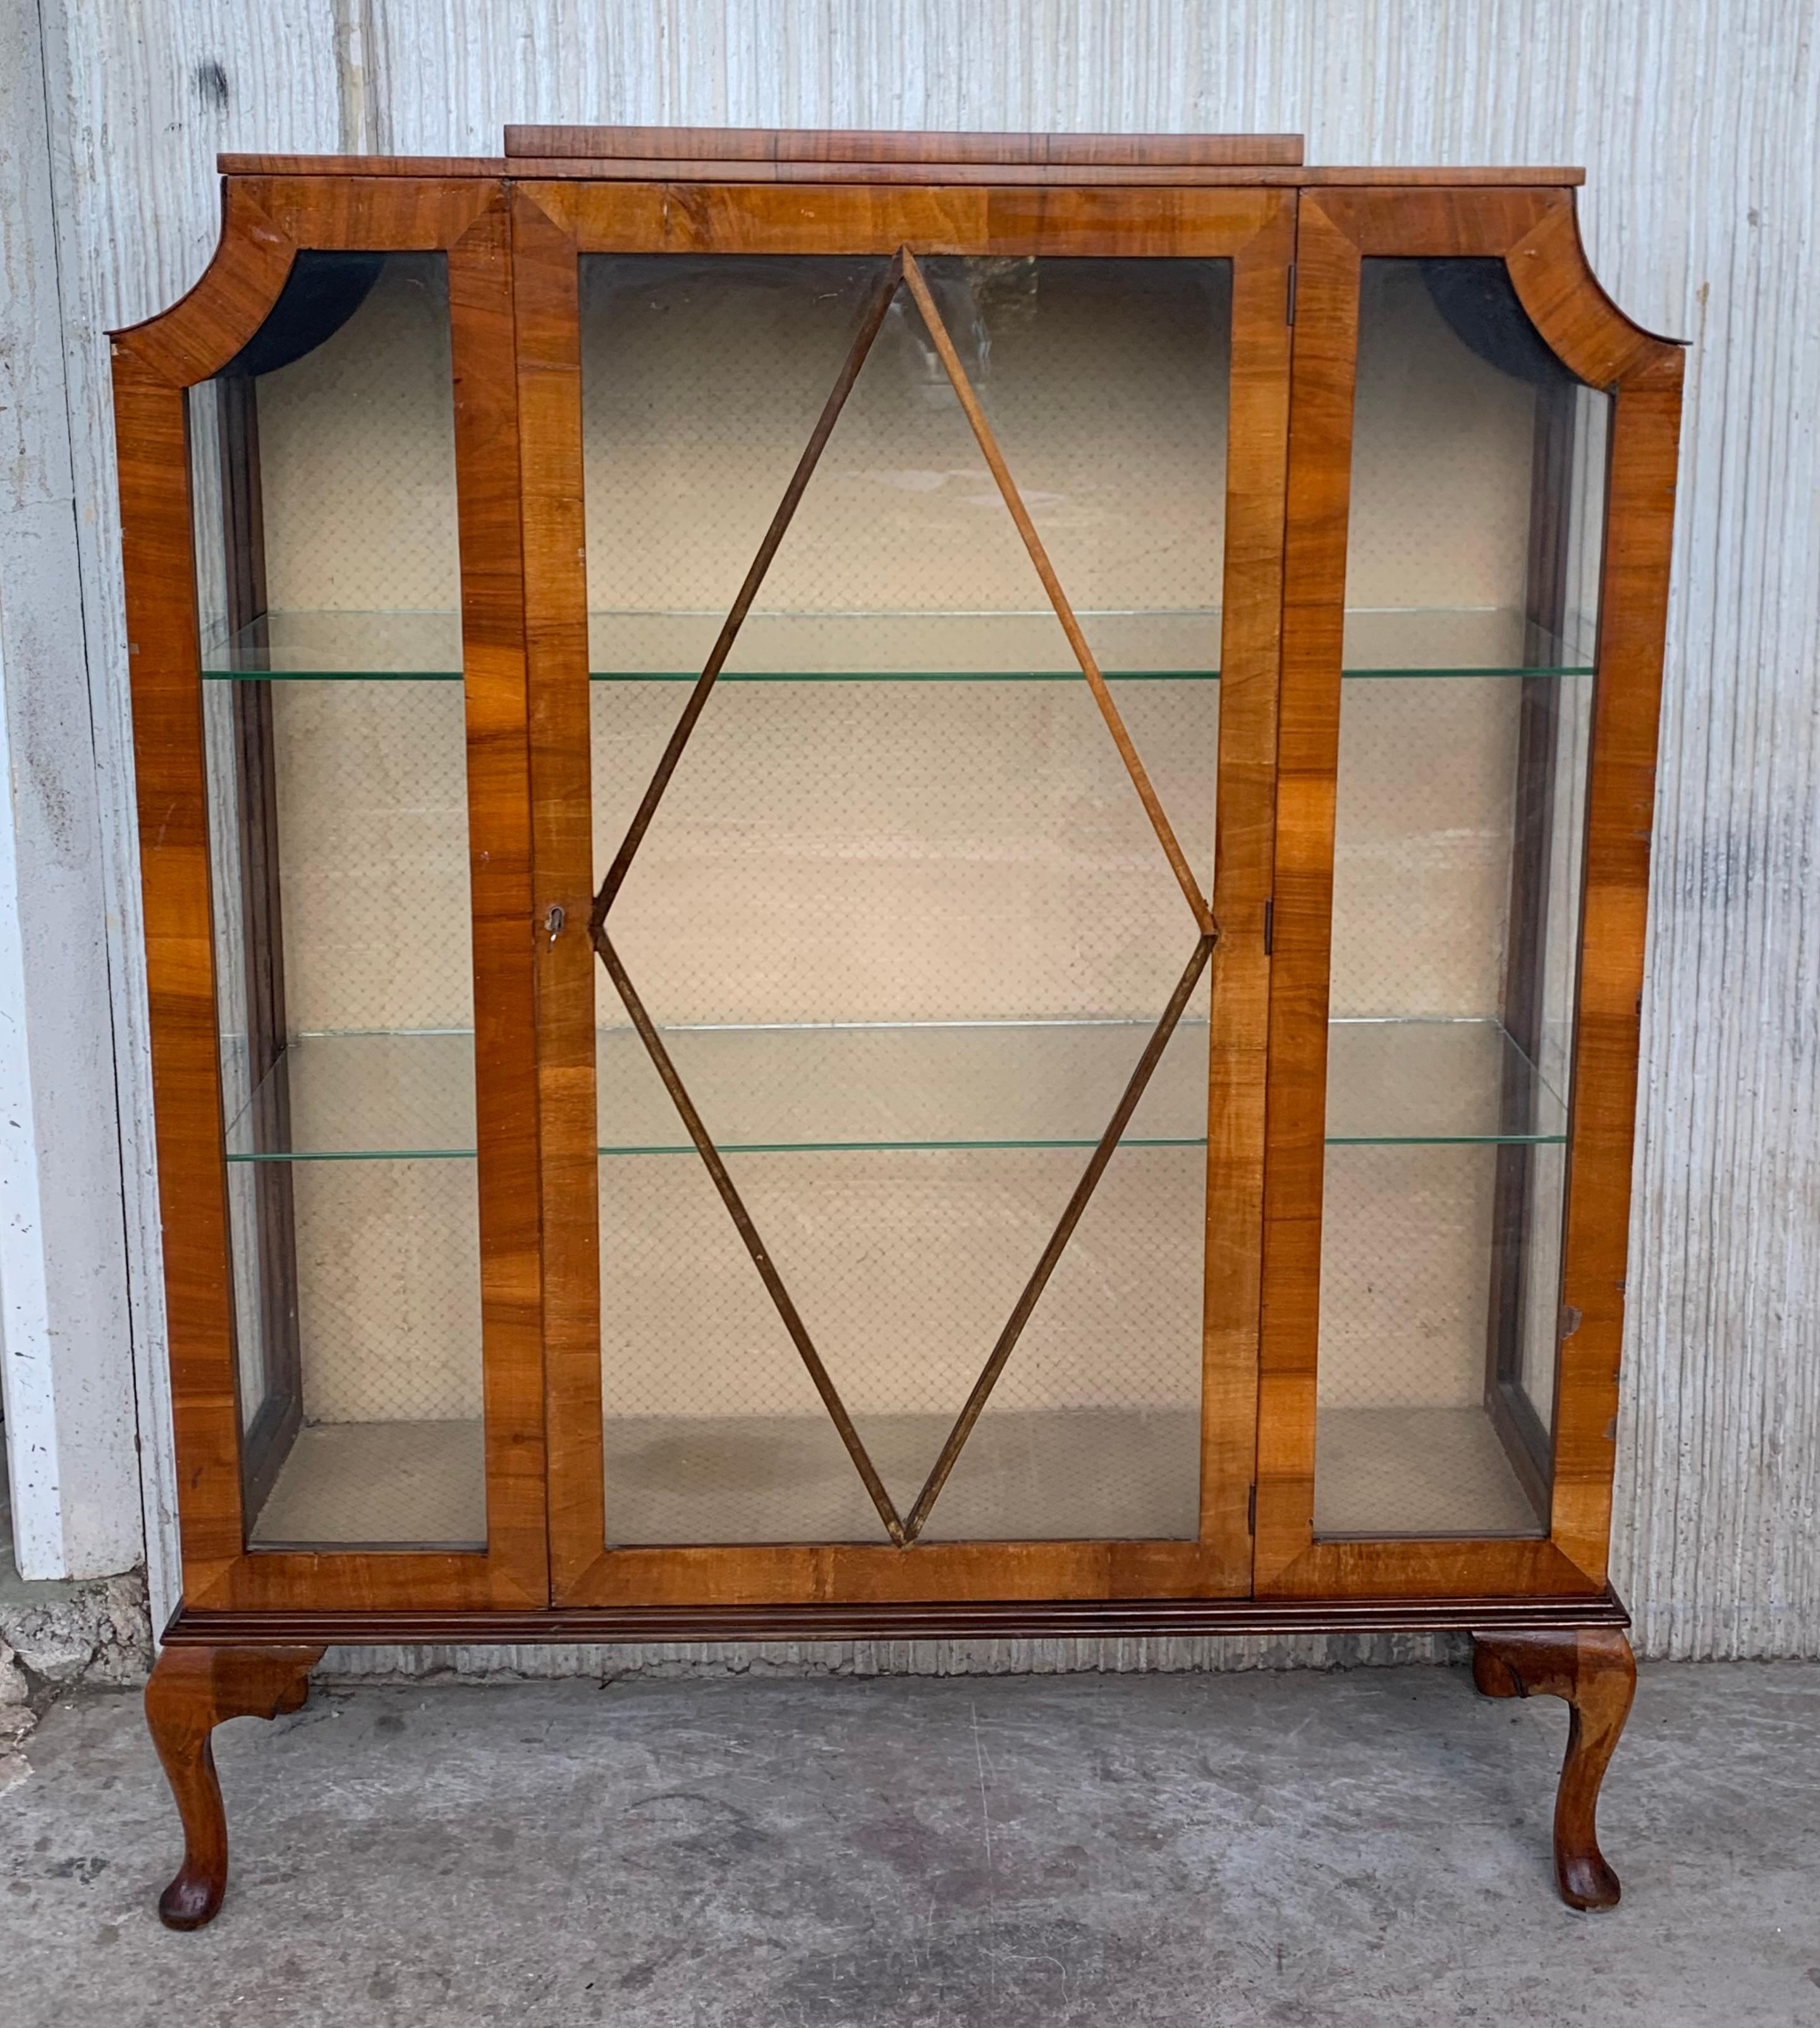 Superb 1930s Art Deco walnut cathedral display cabinet. Gorgeous mid to light tone walnut veneers, still with original working key and two glass shelves. Generously spaced interior, still with its original silk lined backing which is a champagne